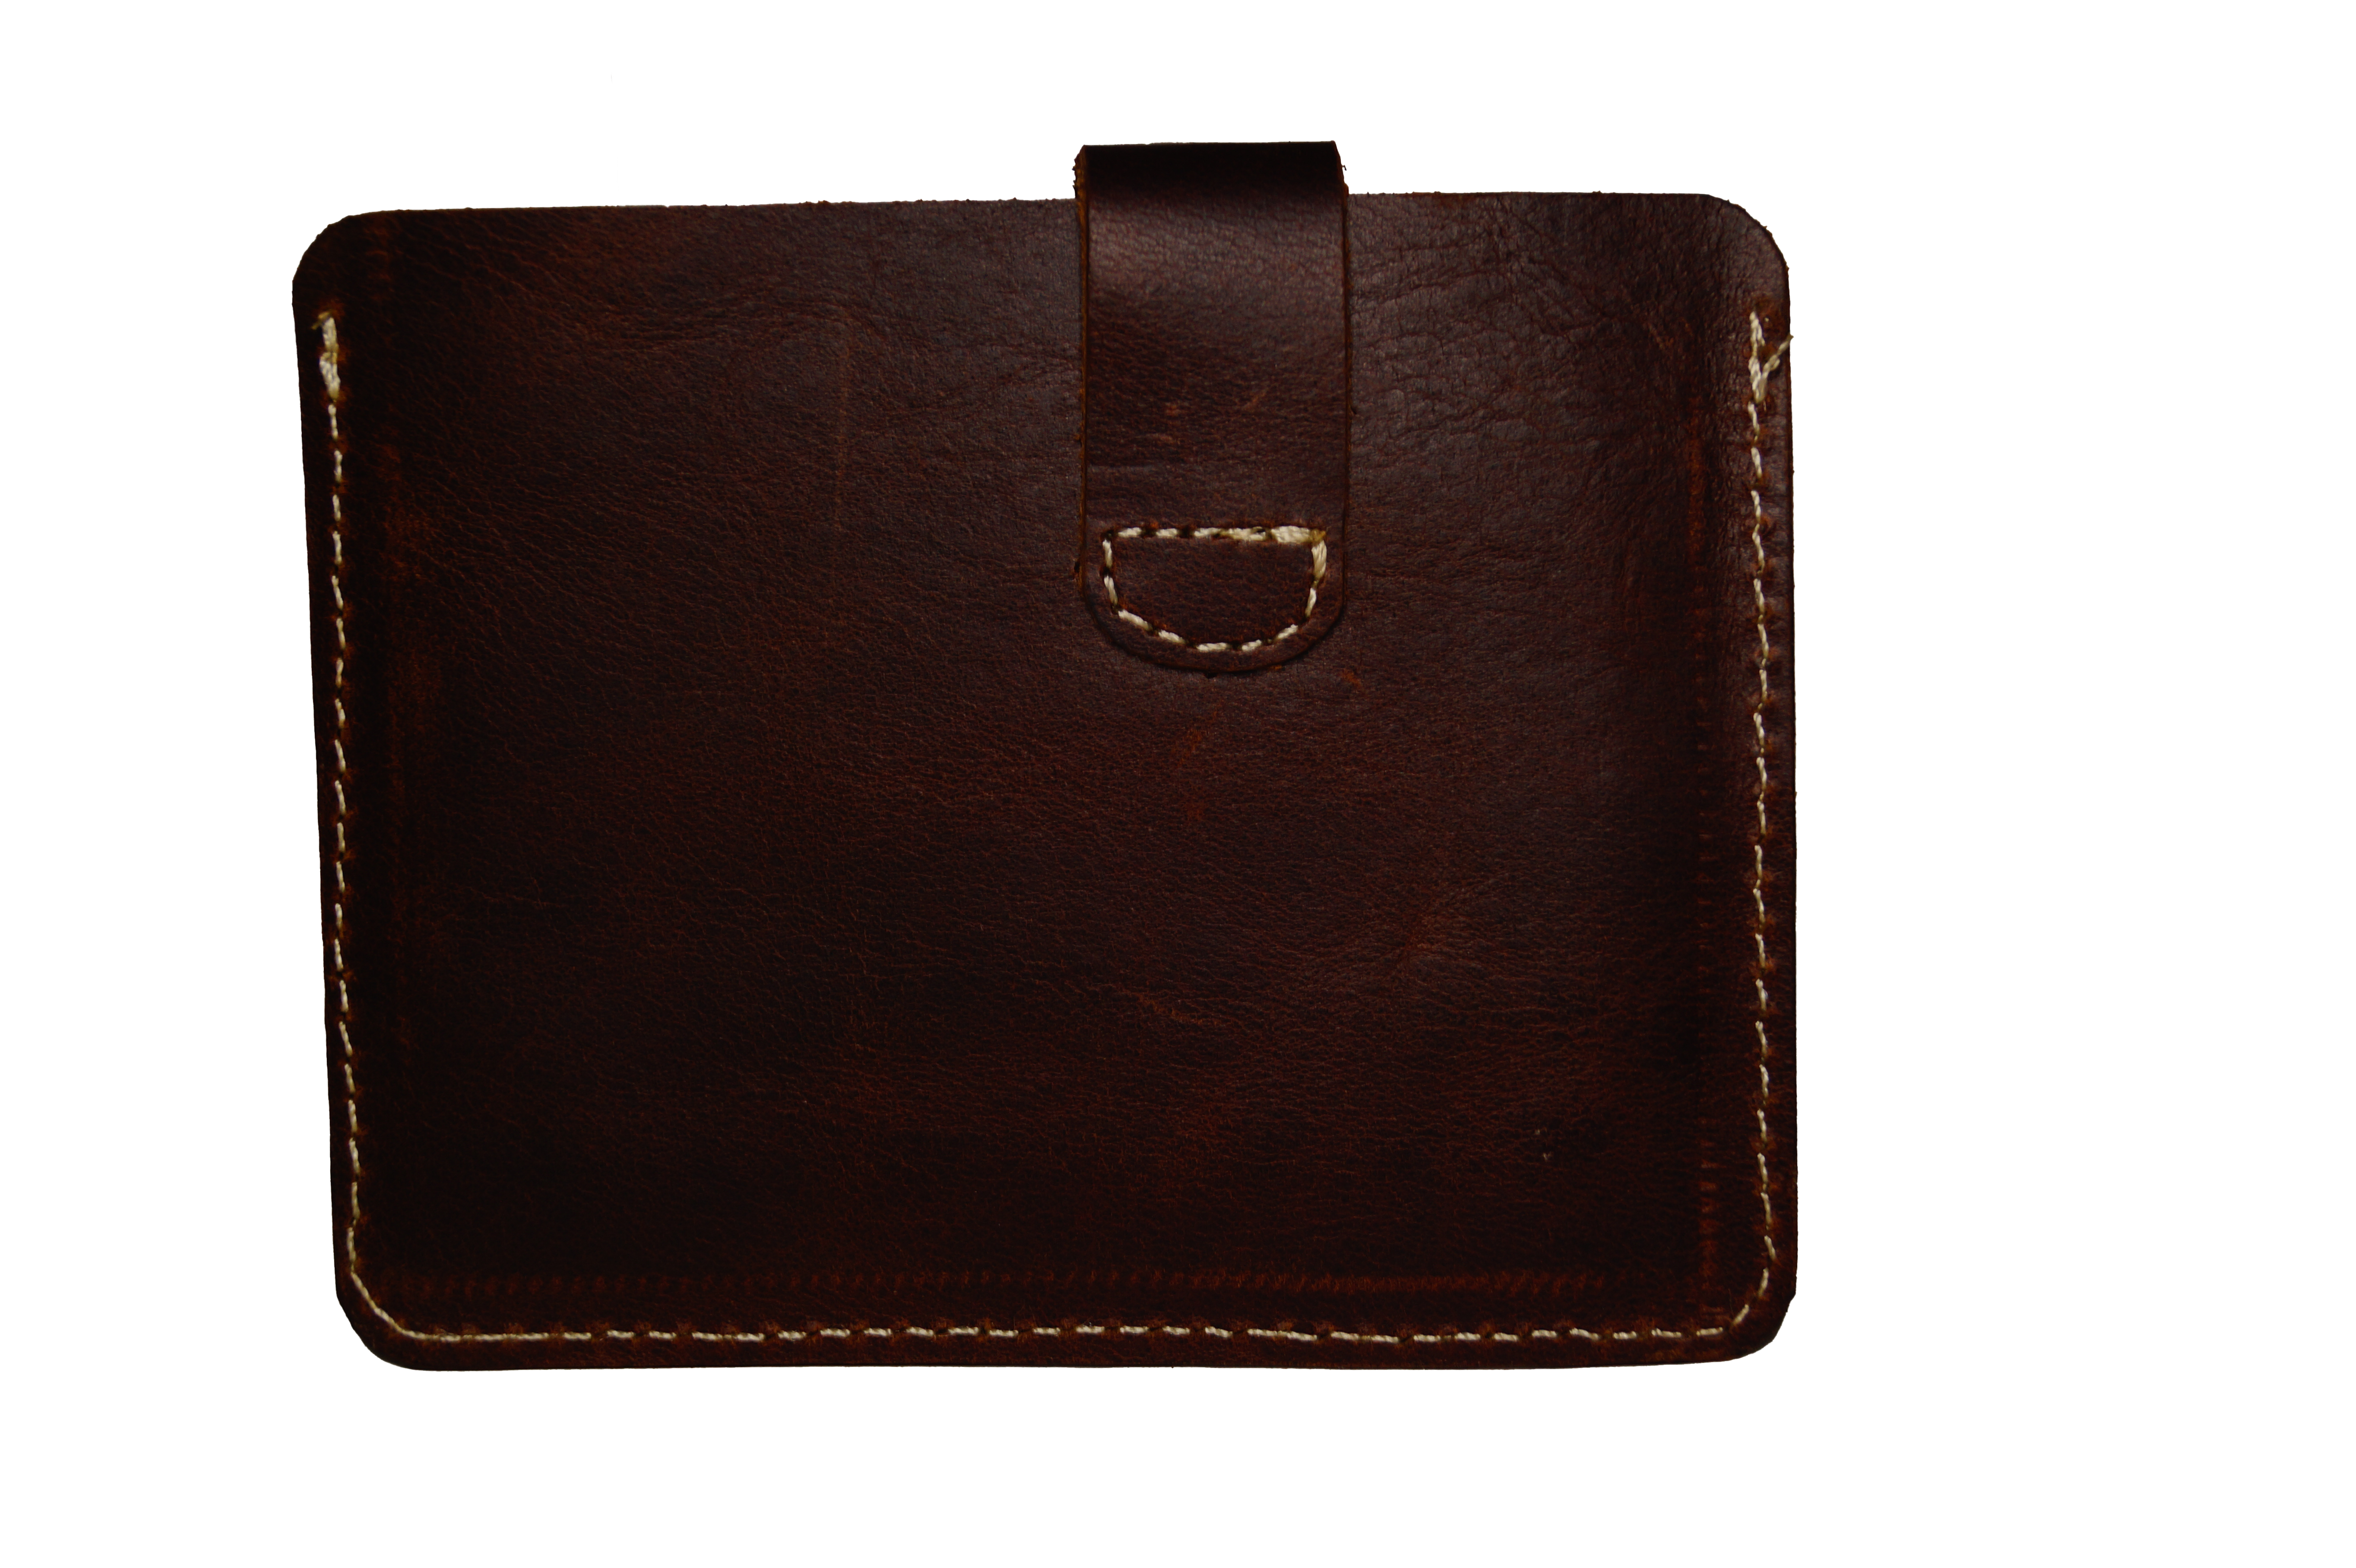 Vhaan's Heritage Oil Pulled Up Leather Card Holder - Dark Brown Shade